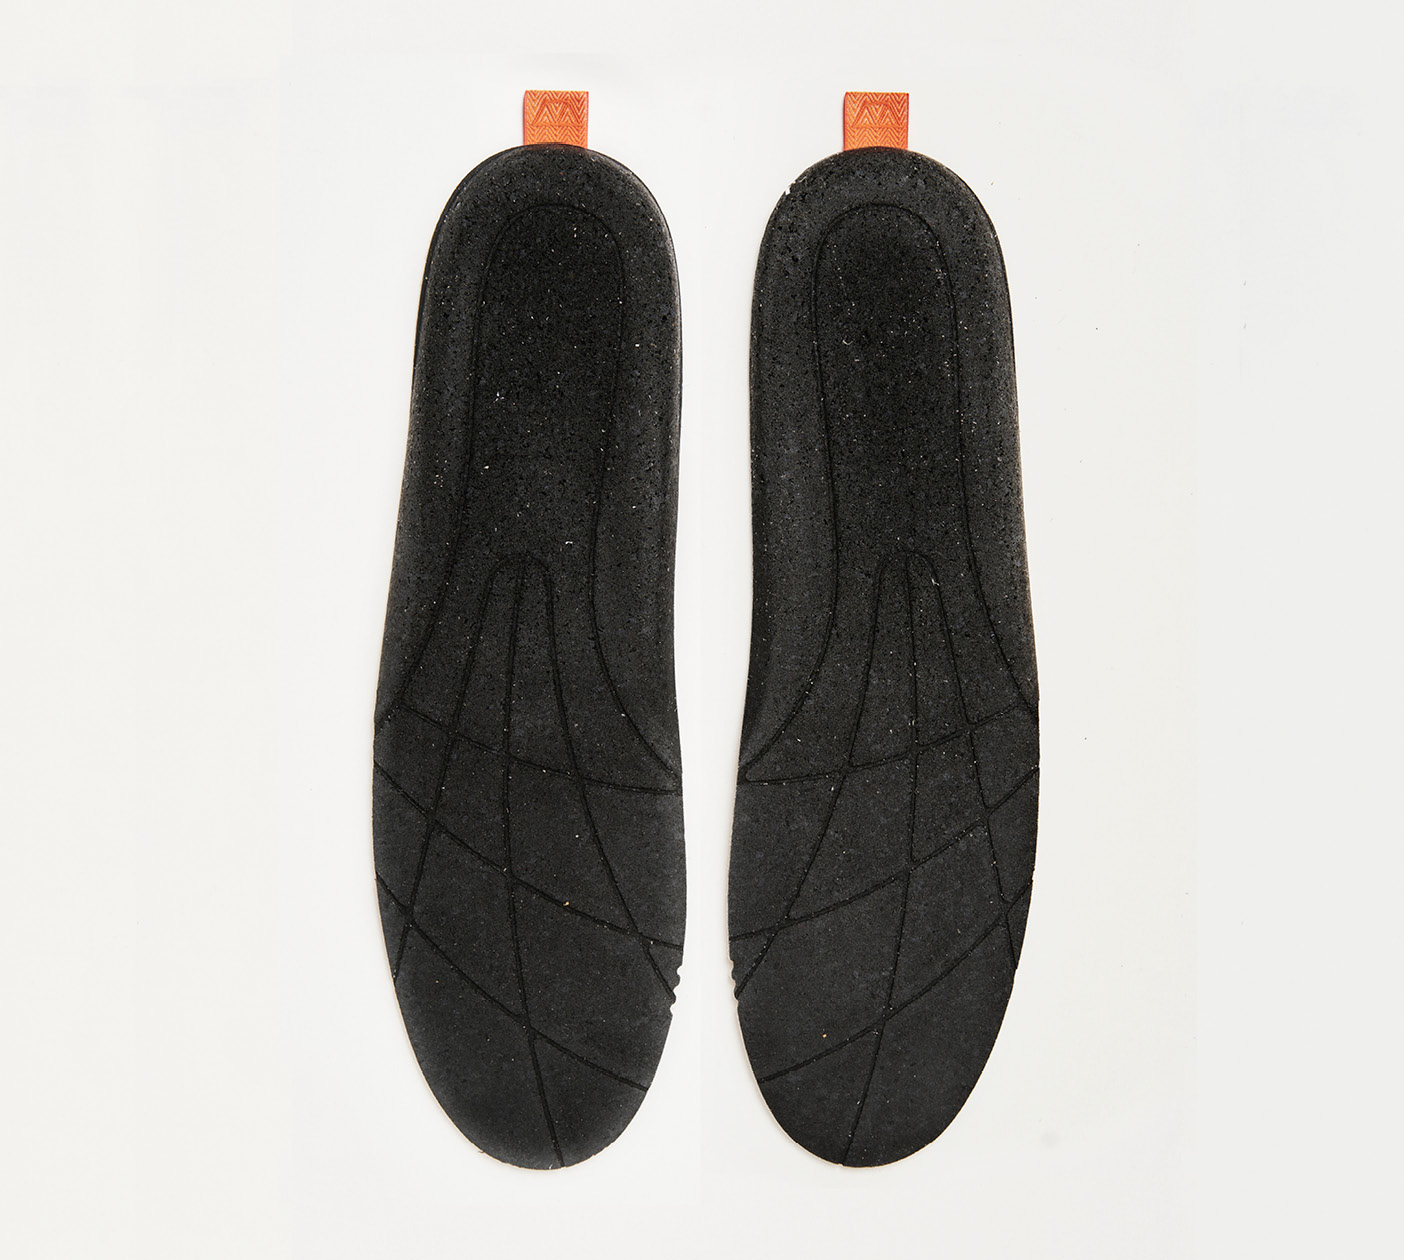 Insoles for superior comfort and breathability